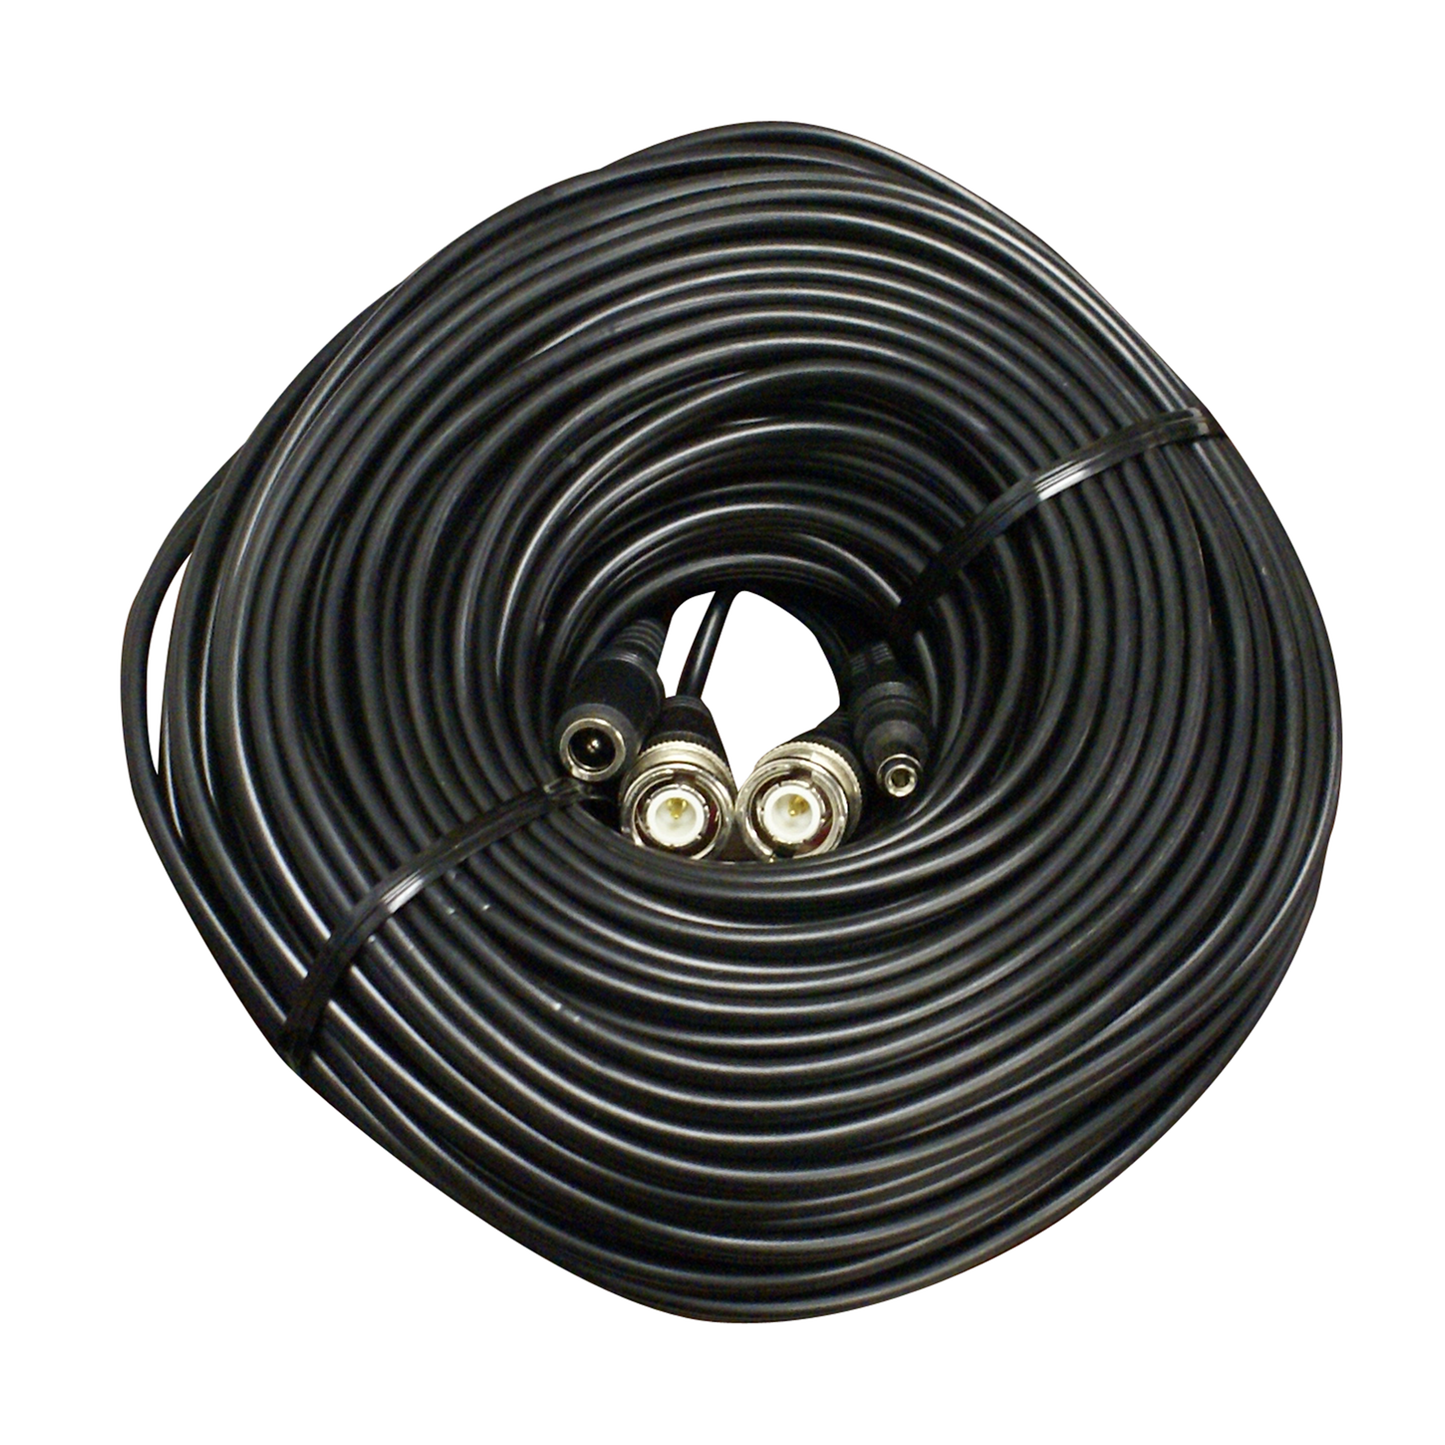 150′ Video/Power Extension Cable with BNC/BNC Connectors